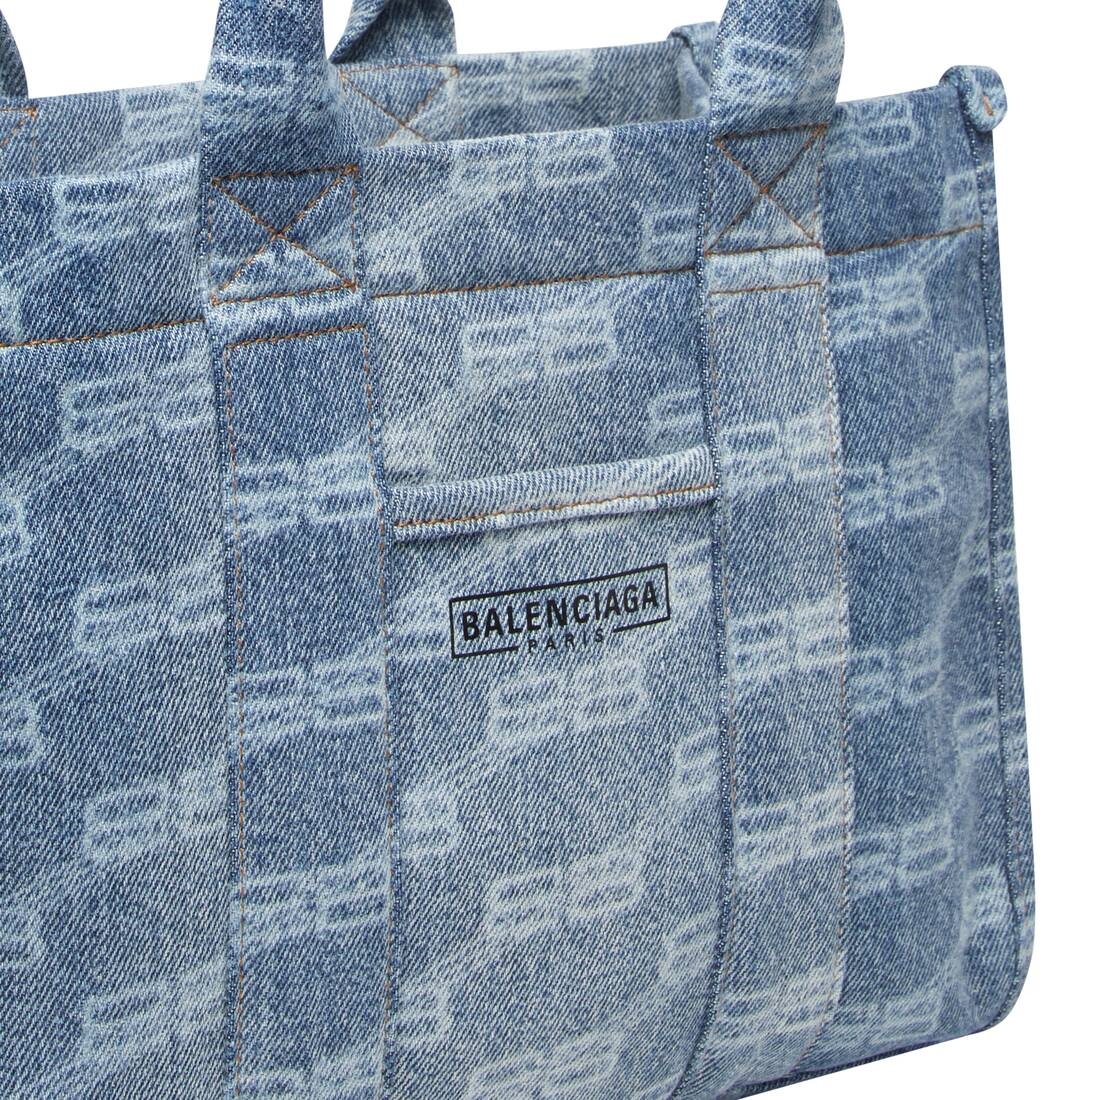 Hardware small tote bag with strap bb monogram bleached denim